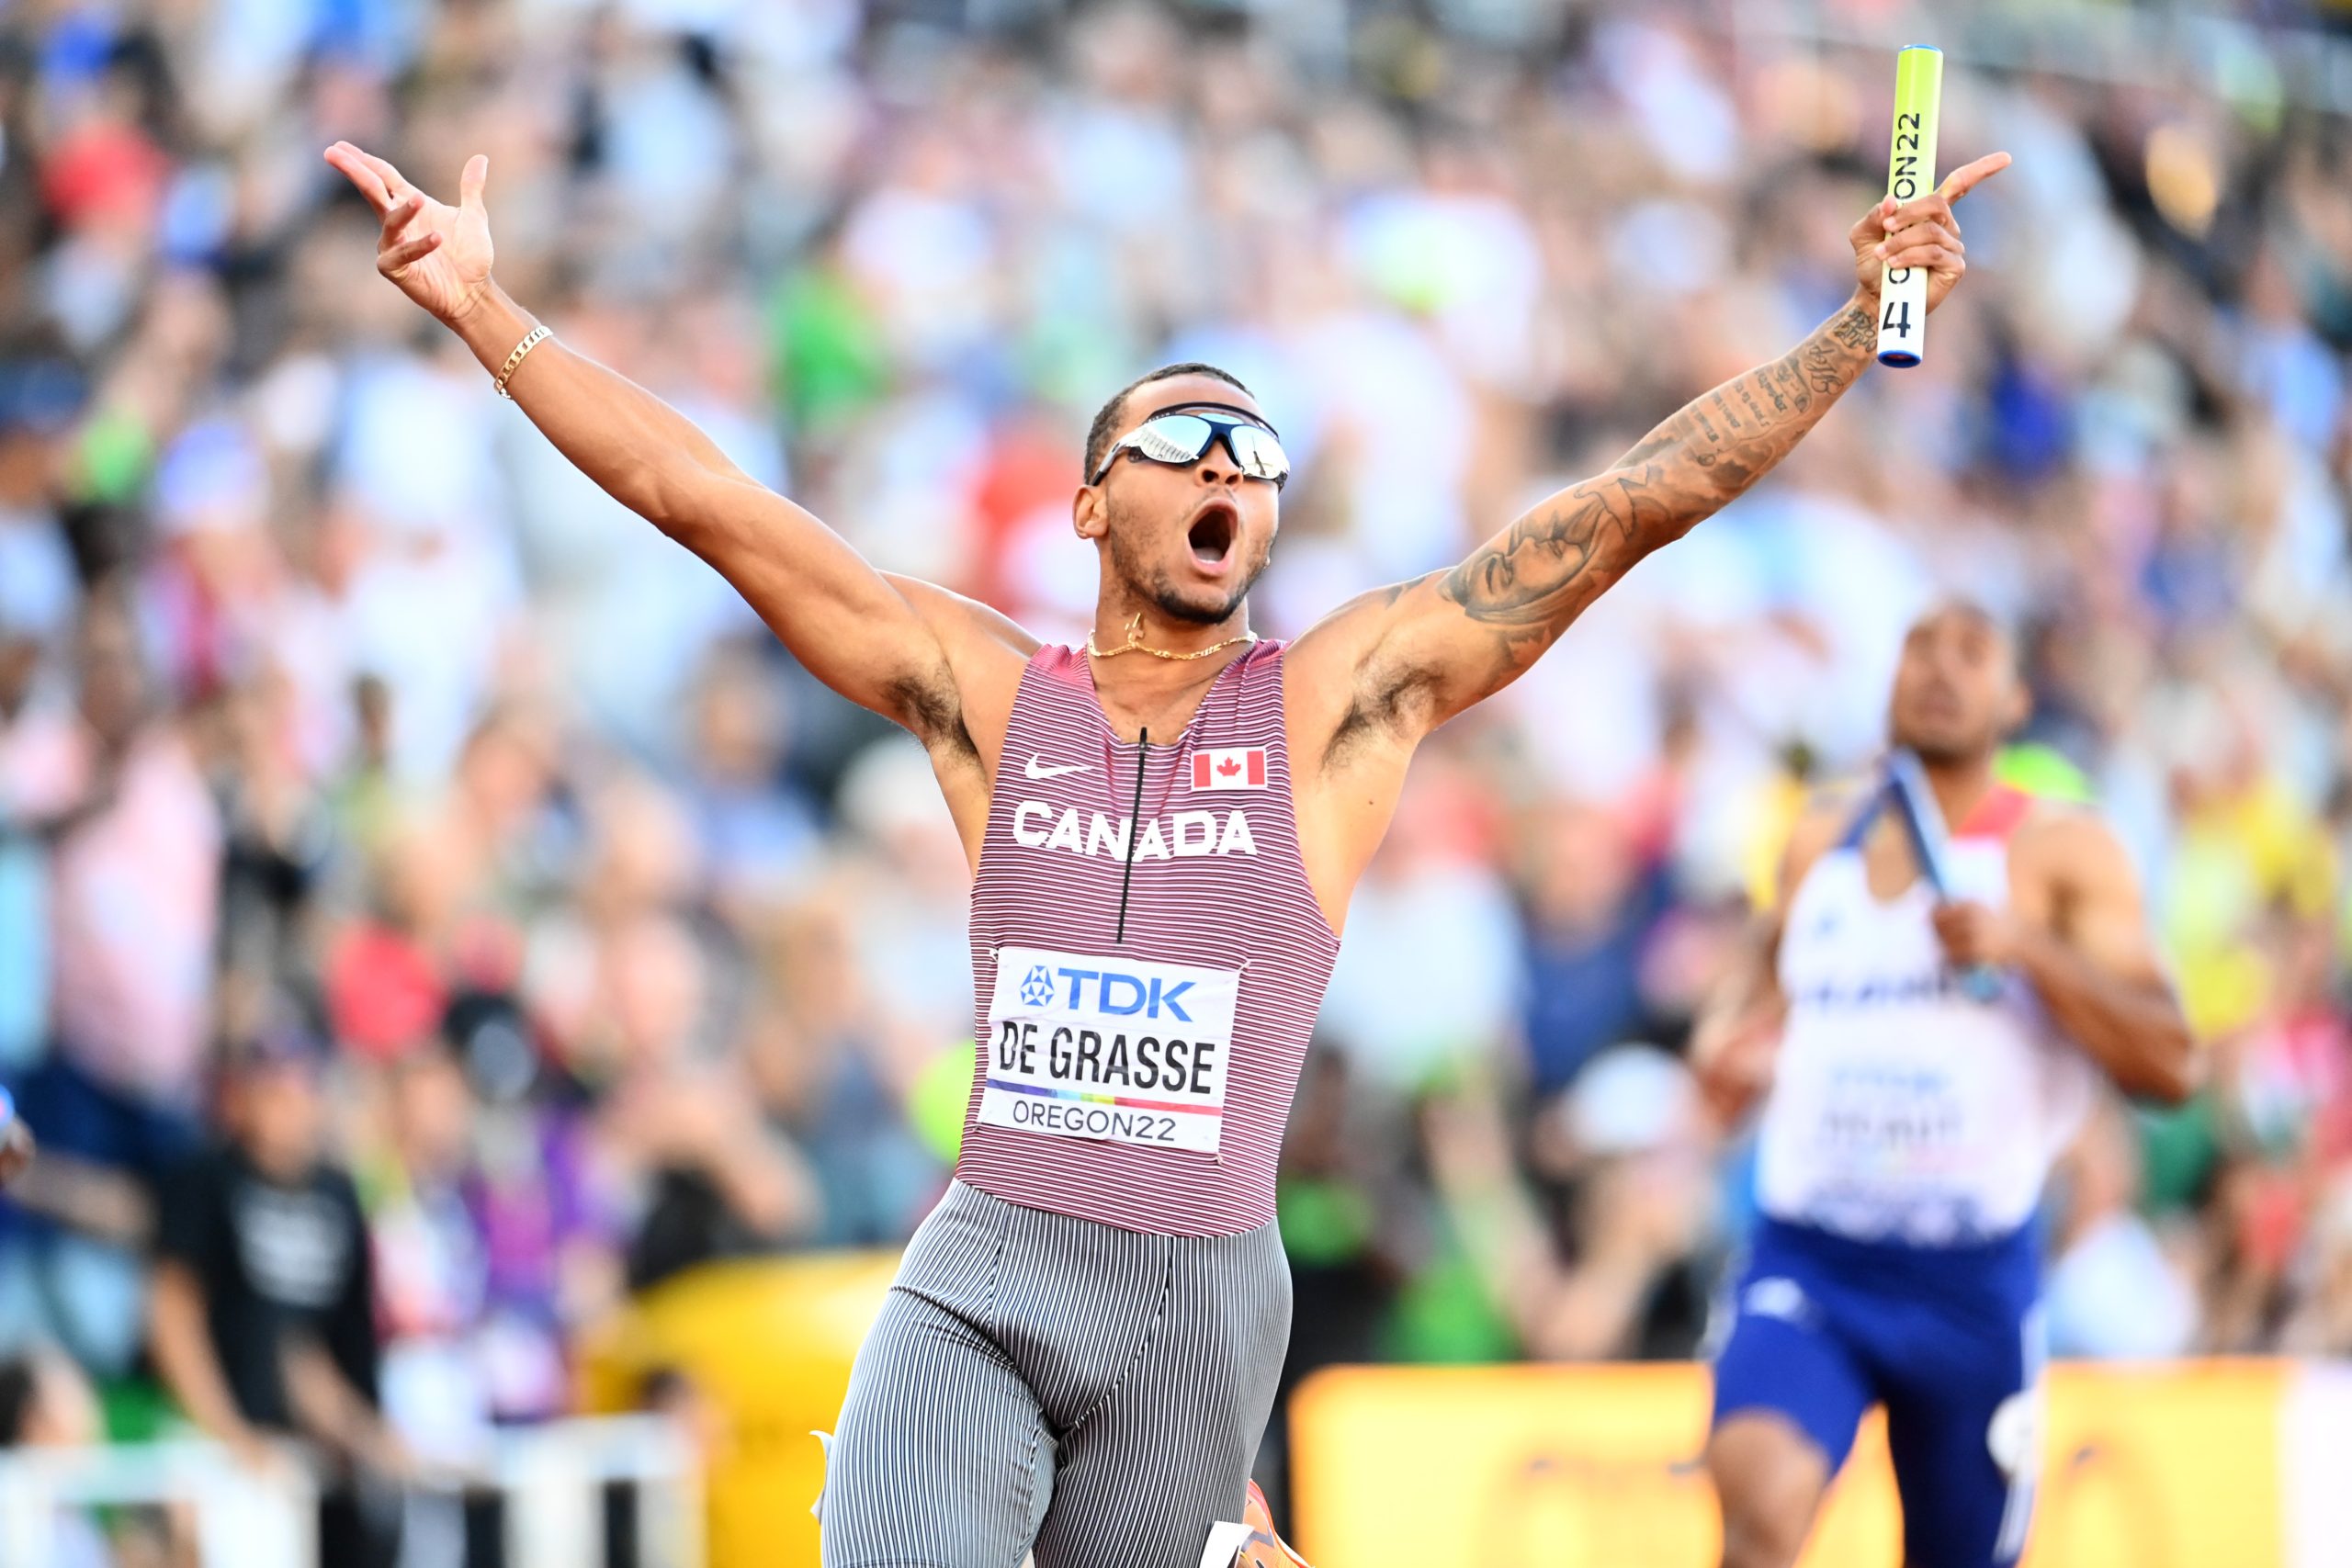 Andre de Grasse takes Canada home ahead of USA in the men's 4x100m final Oregon22